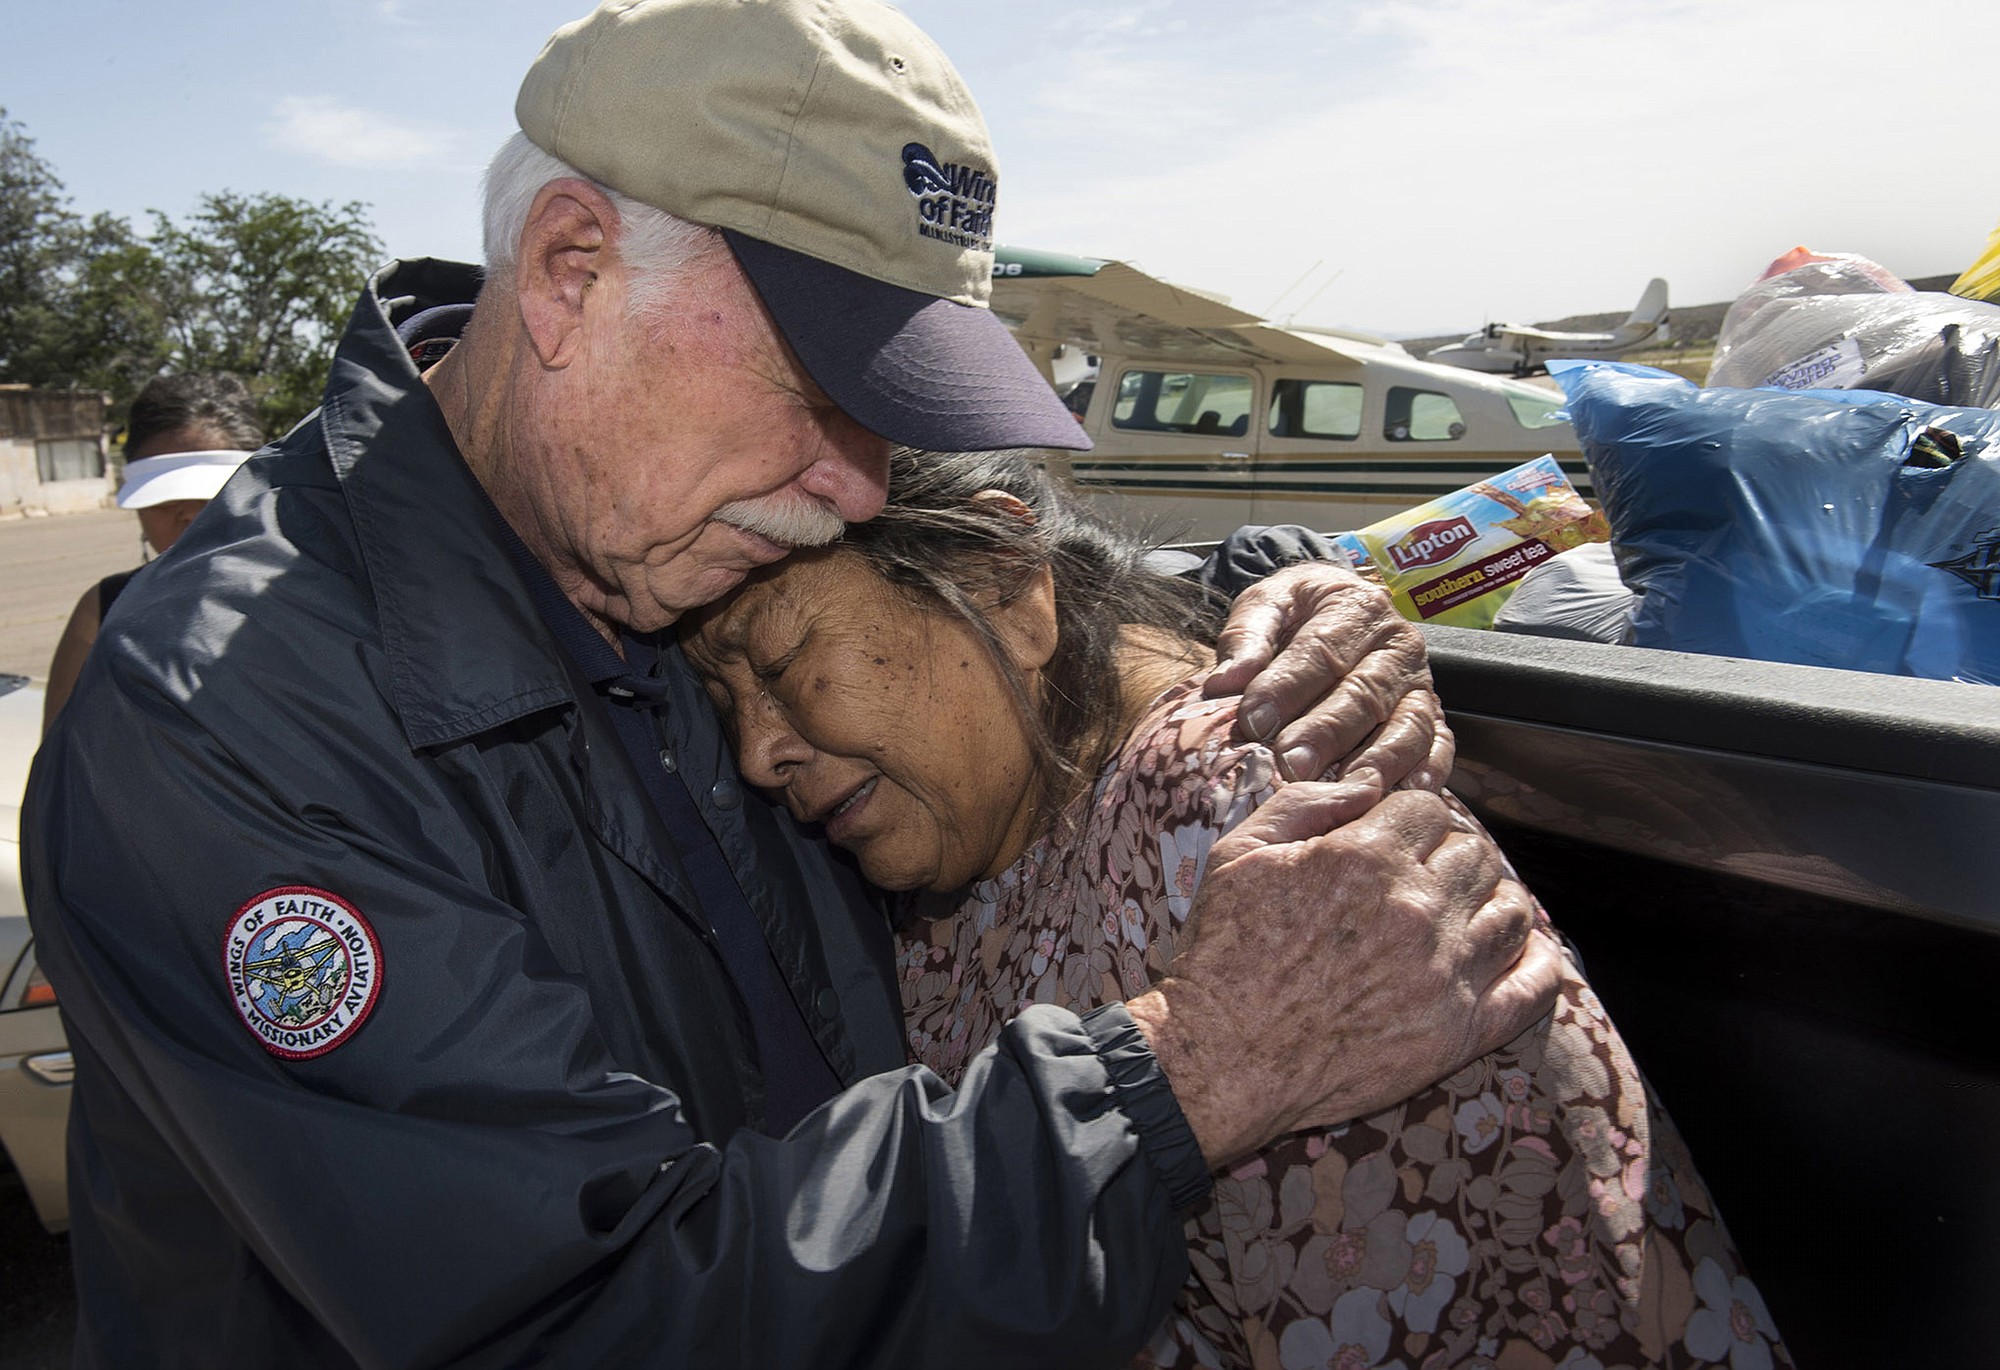 Dale Whinery, left, embraces Judy Kinney, after saying a prayer for her at San Carlos Apache Reservation in Arizona on April 9, 2015.